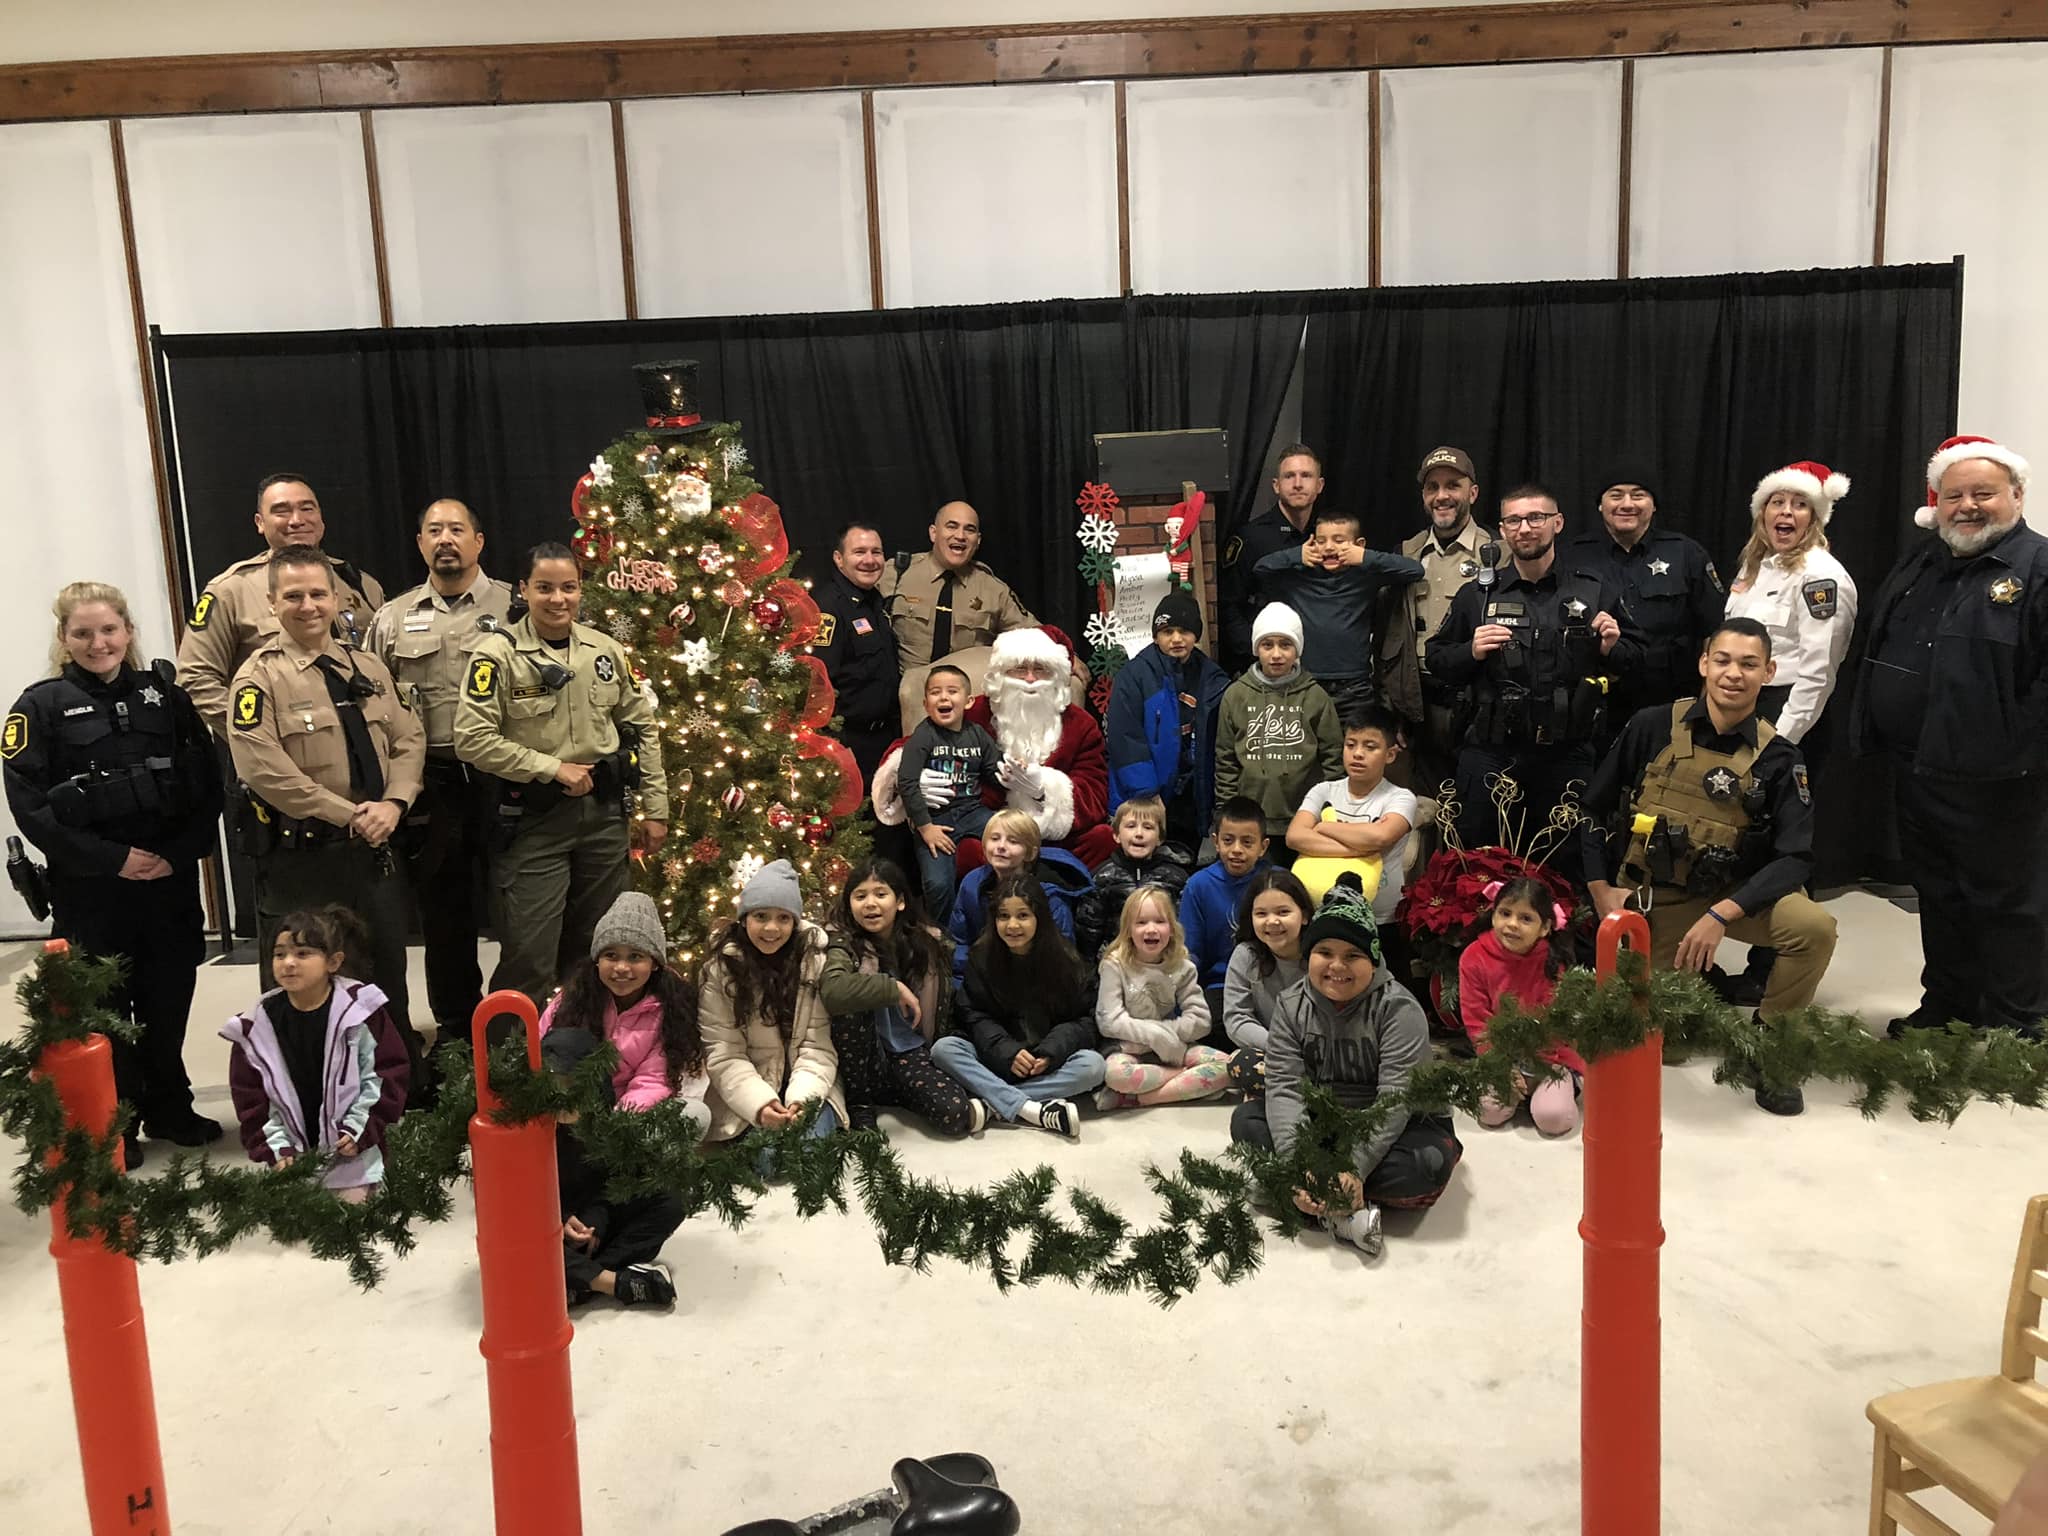 The McHenry County Police Charaties announced the success of this year's Shop with a Cop program